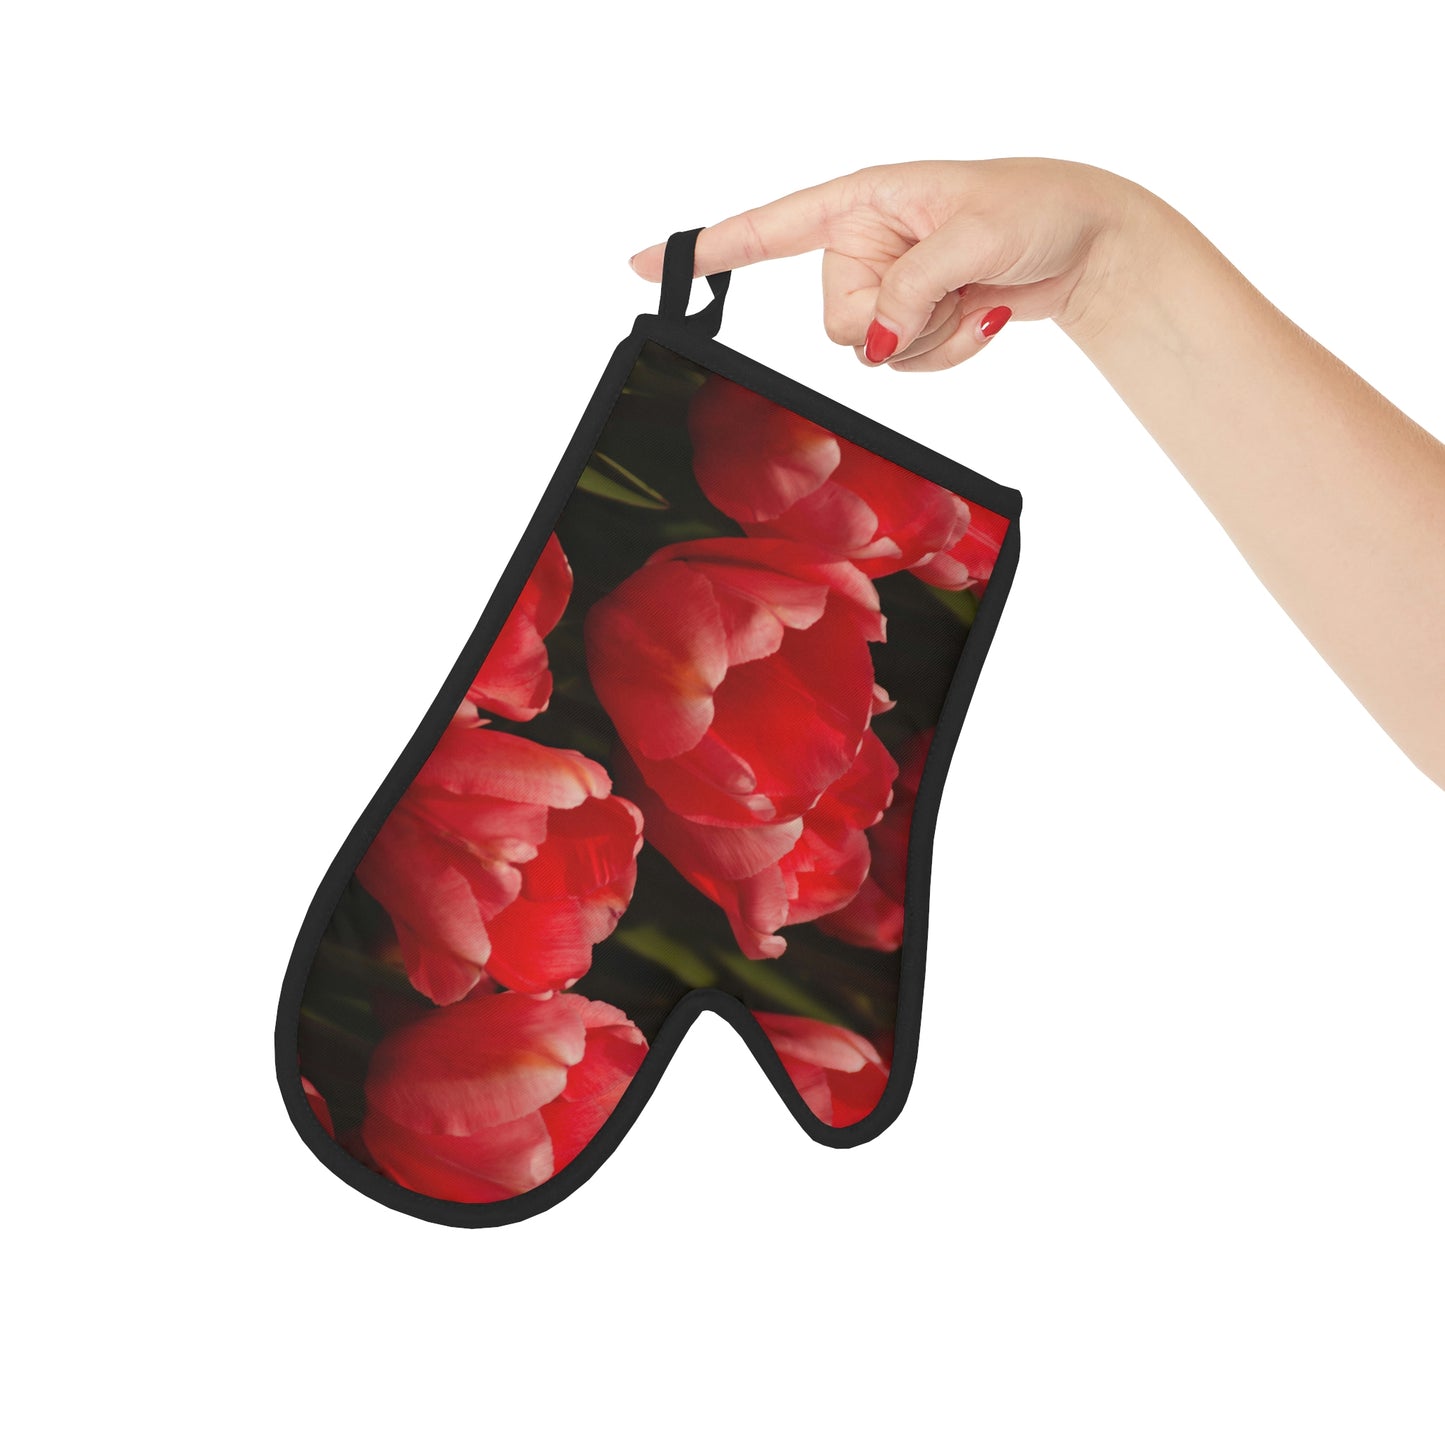 Flowers 13 Oven Glove